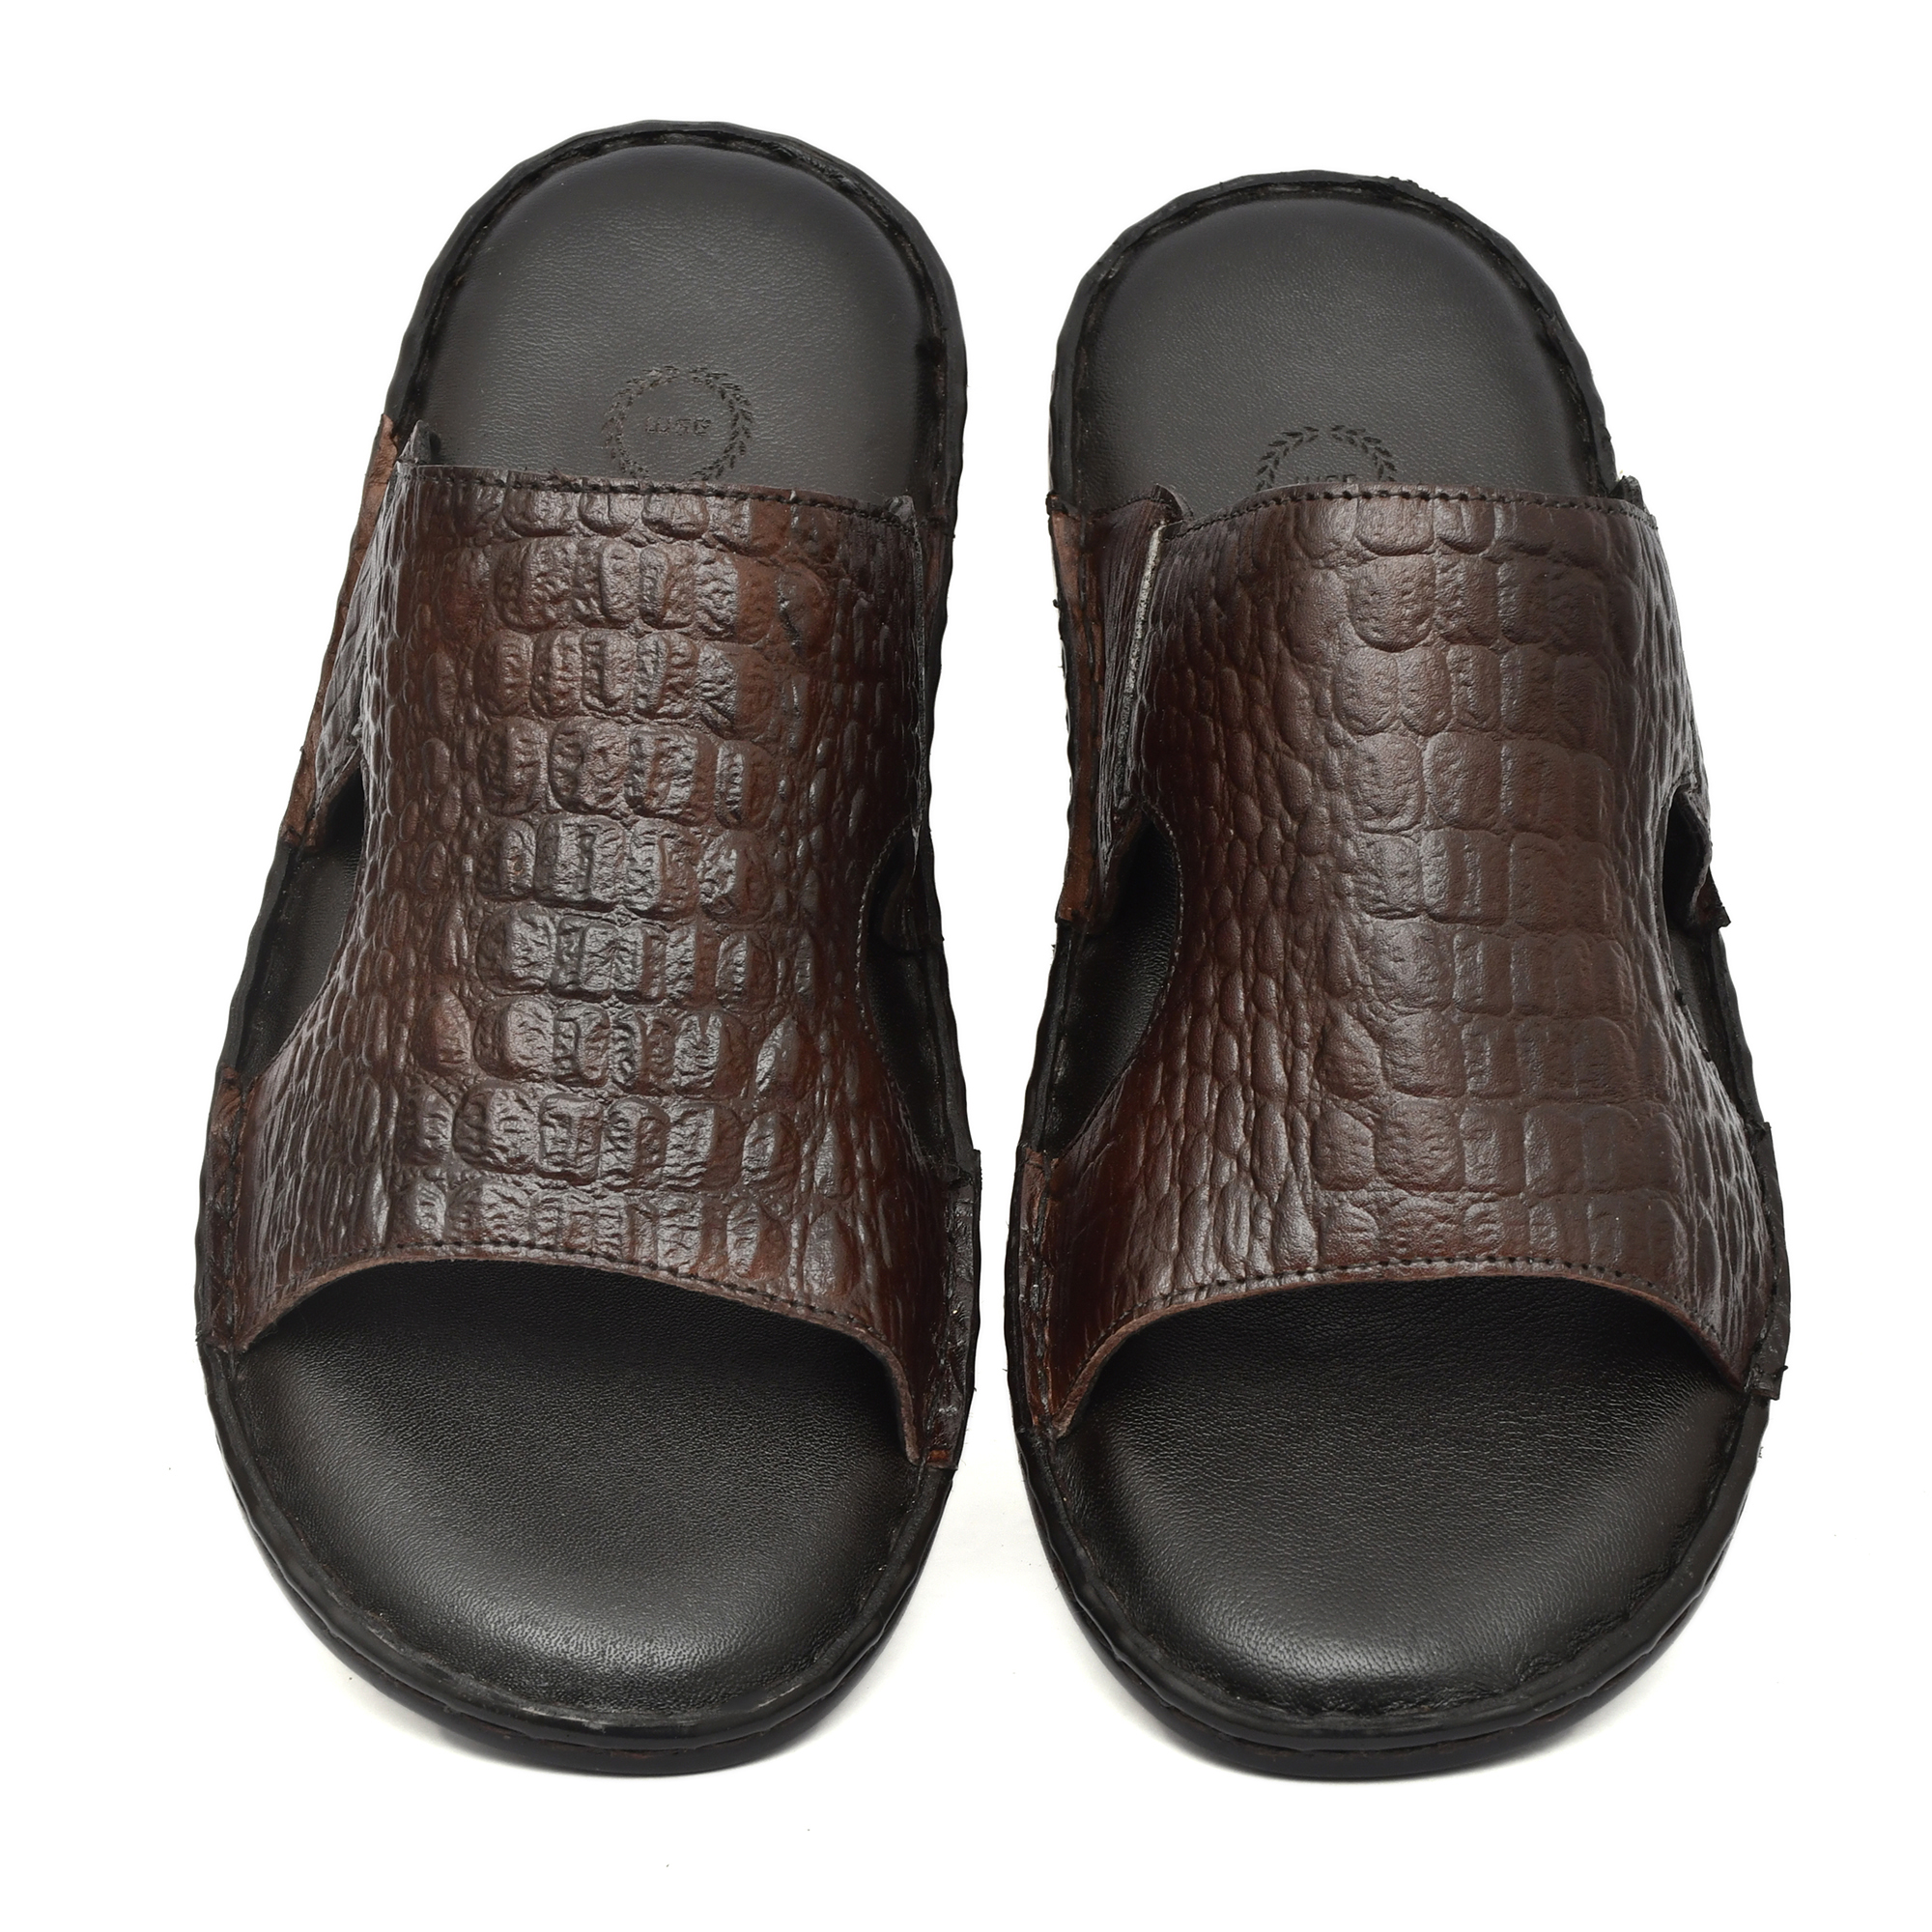 Brown Crocodile Embossed Leather Slippers for Men with Memory foam footpad by asm.